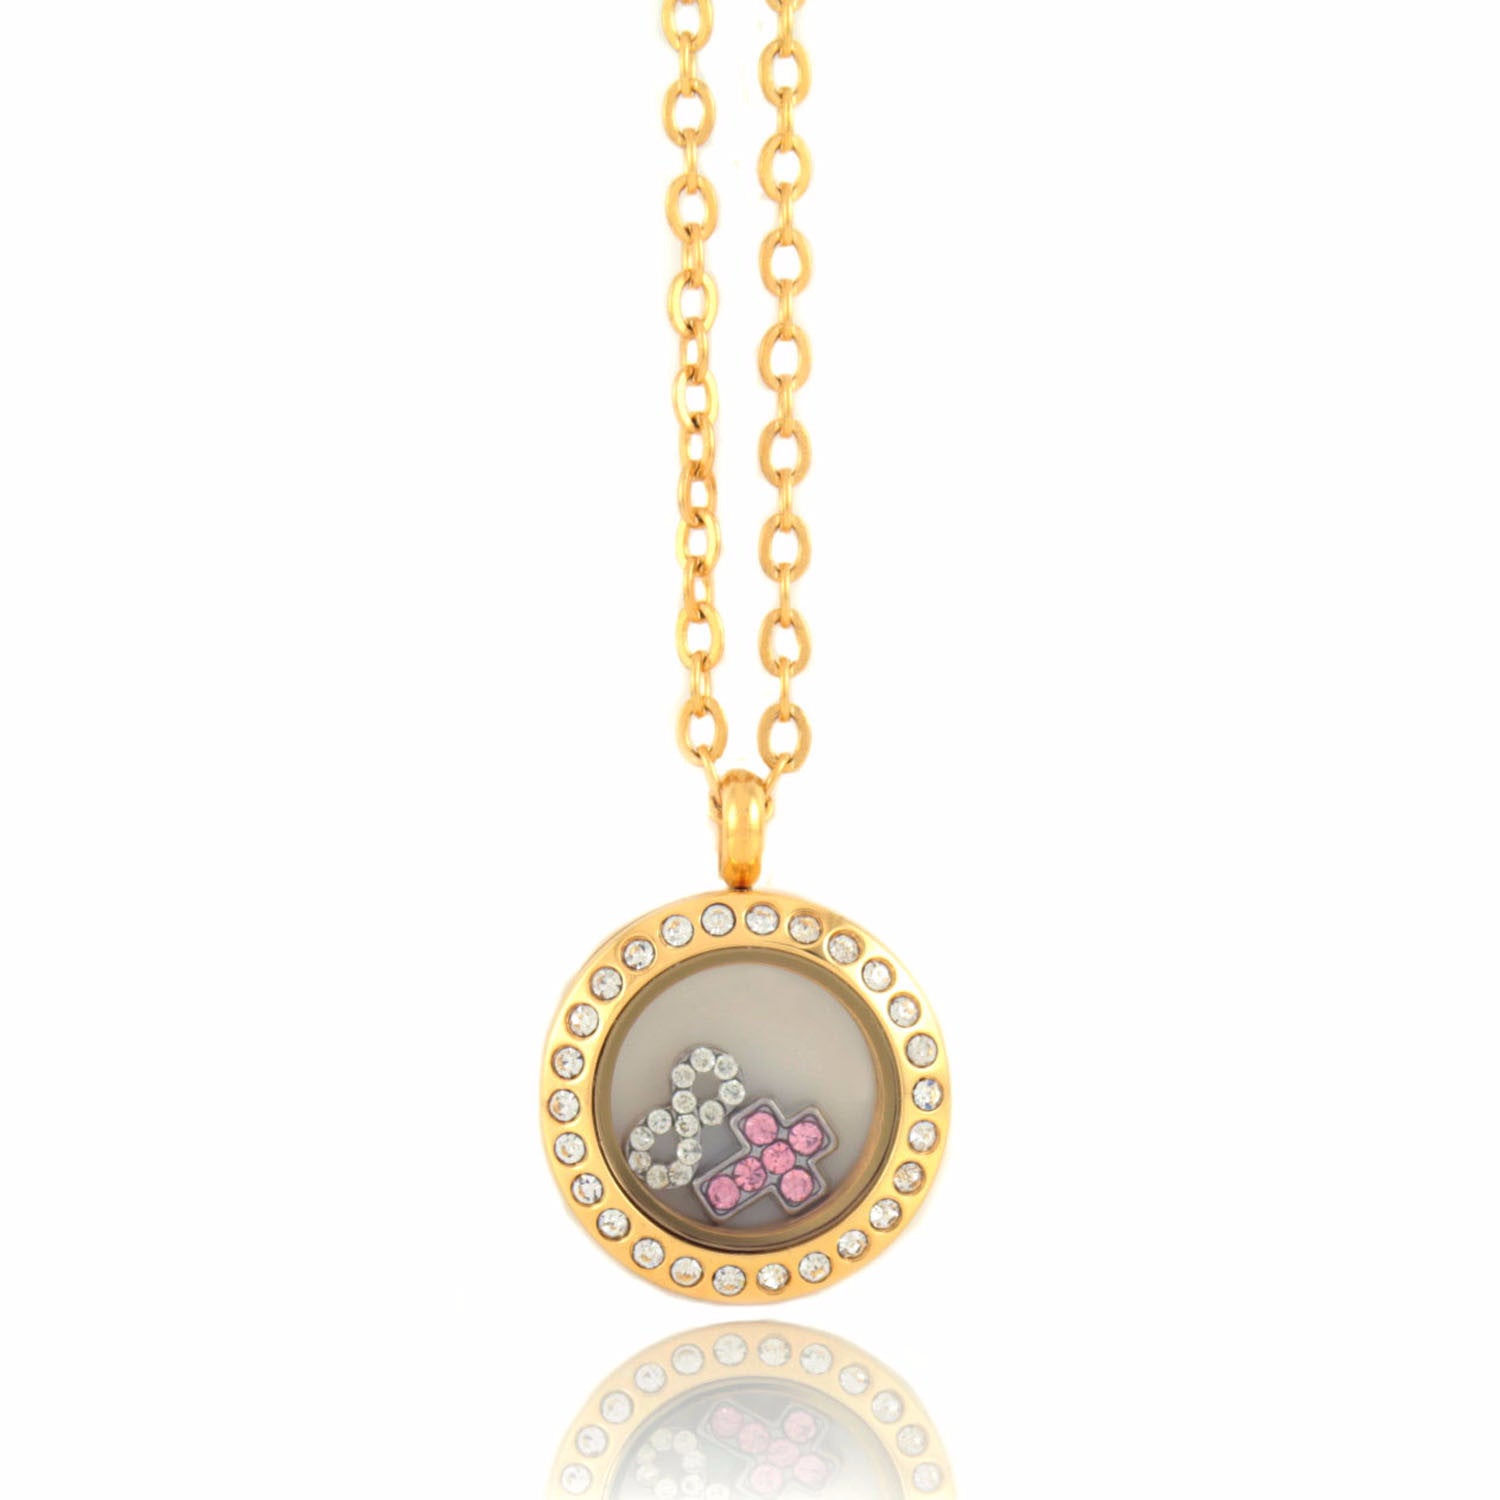 Stainless Steel Floating Locket Necklace with 4 Charms (Mini Gold Rhinestone)